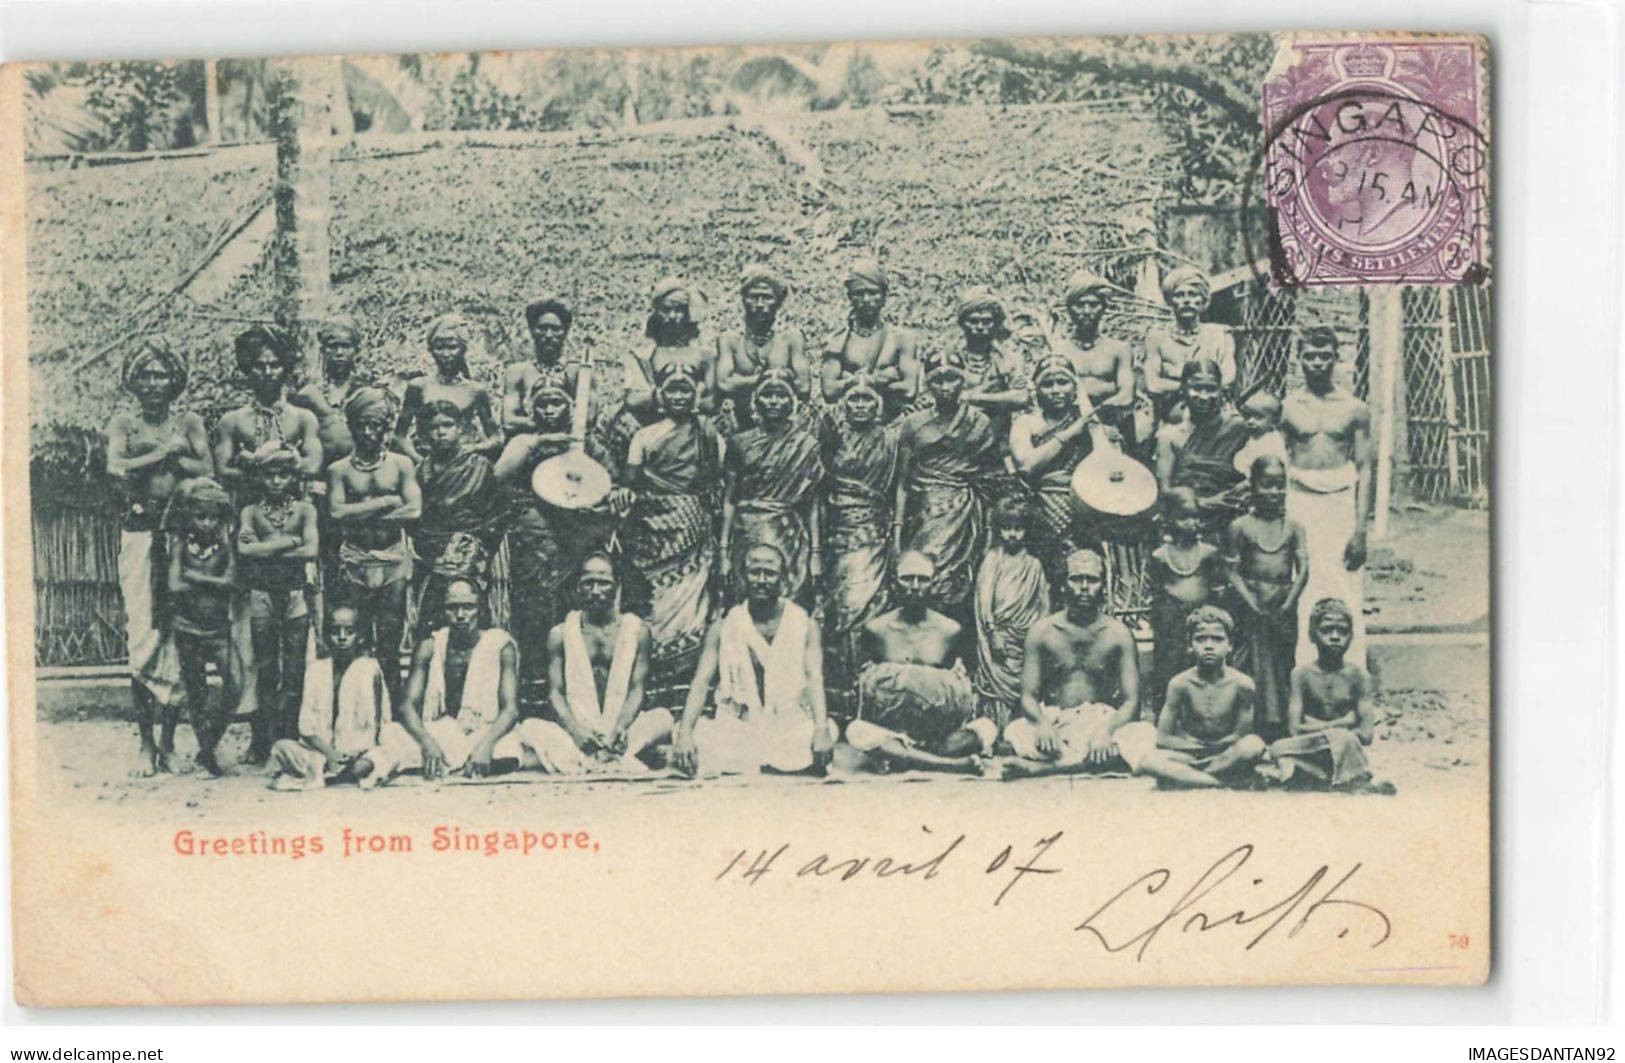 SINGAPOUR #FG51838 SINGAPORE GREETINGS FROM INDIA INDE INDOUS 1907 - Singapour